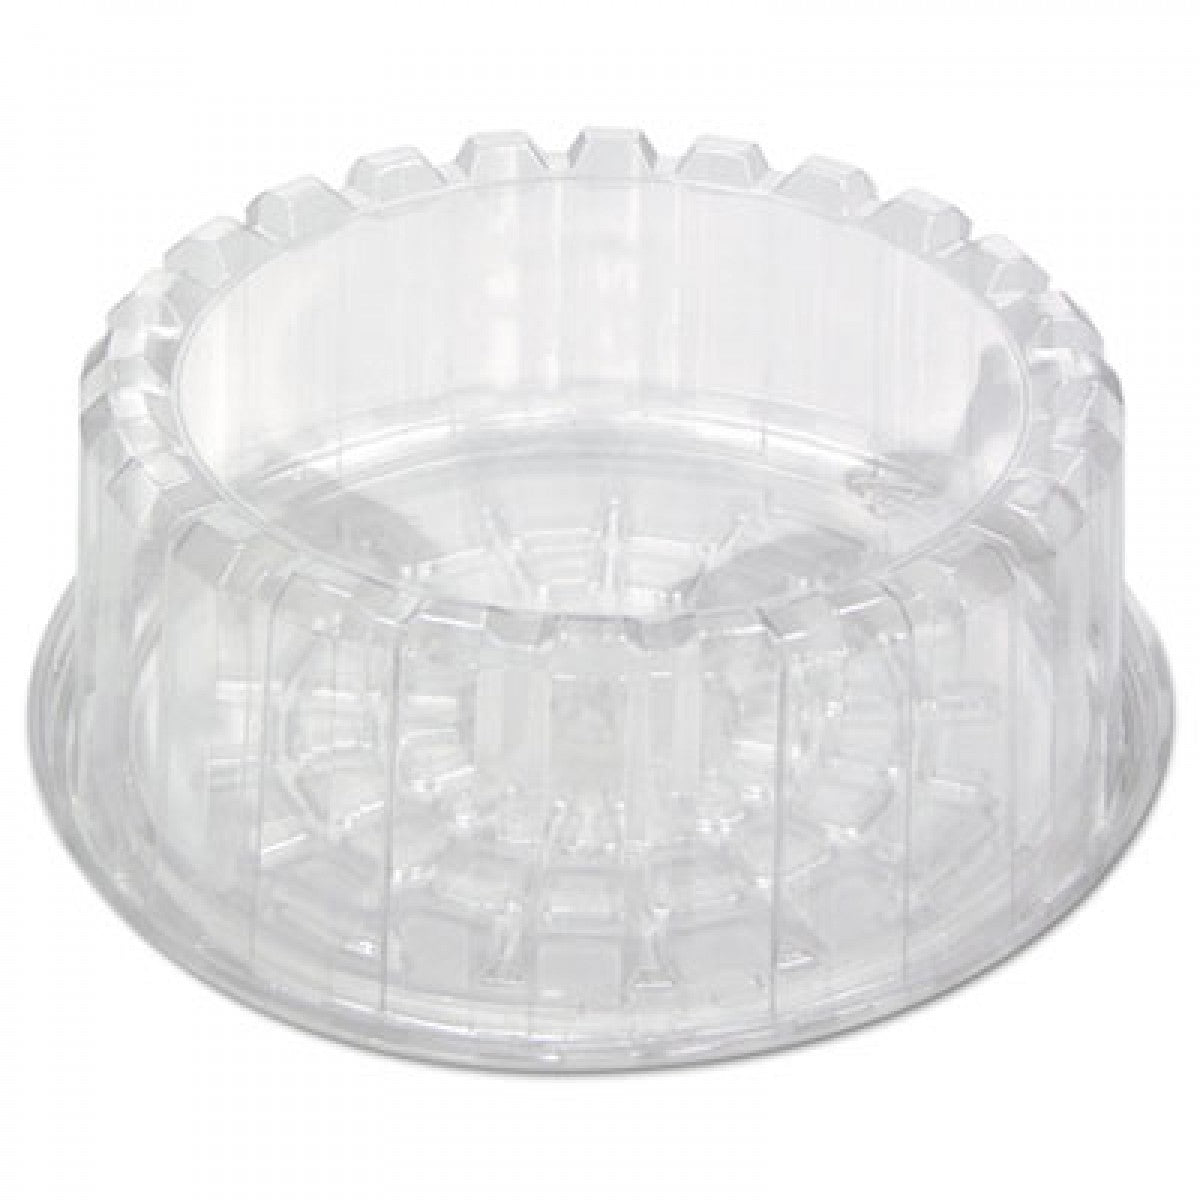 8" Cake Dome Containers - Gafbros